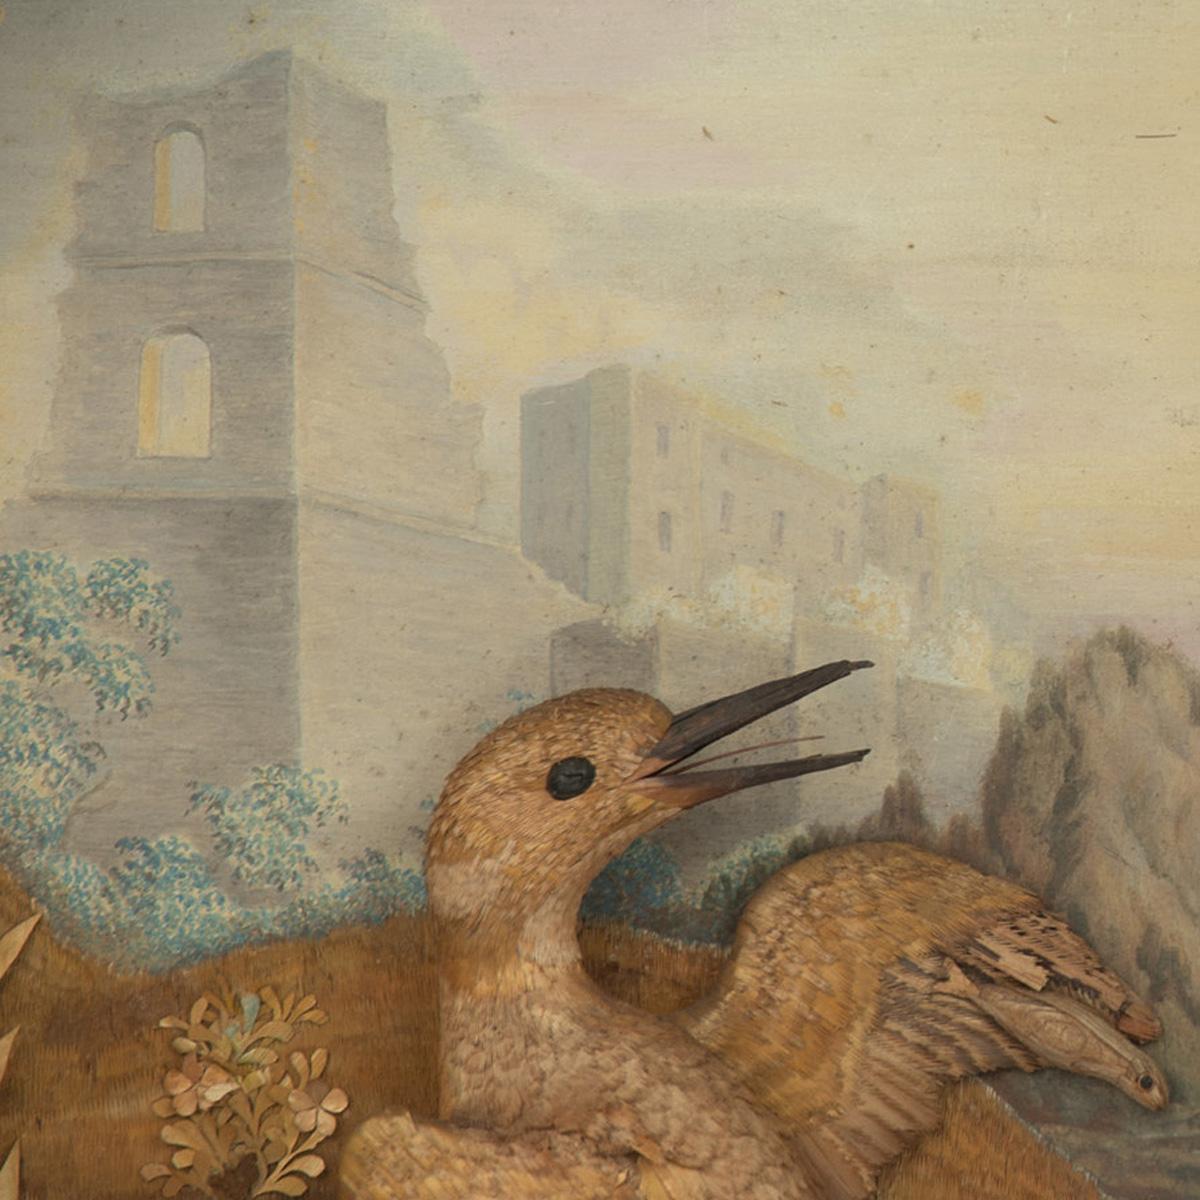 exceptional straw work diorama of an owl and kingfisher, almost certainly by “Miss Gregg(e)” and part of the collection in the Leverian Museum